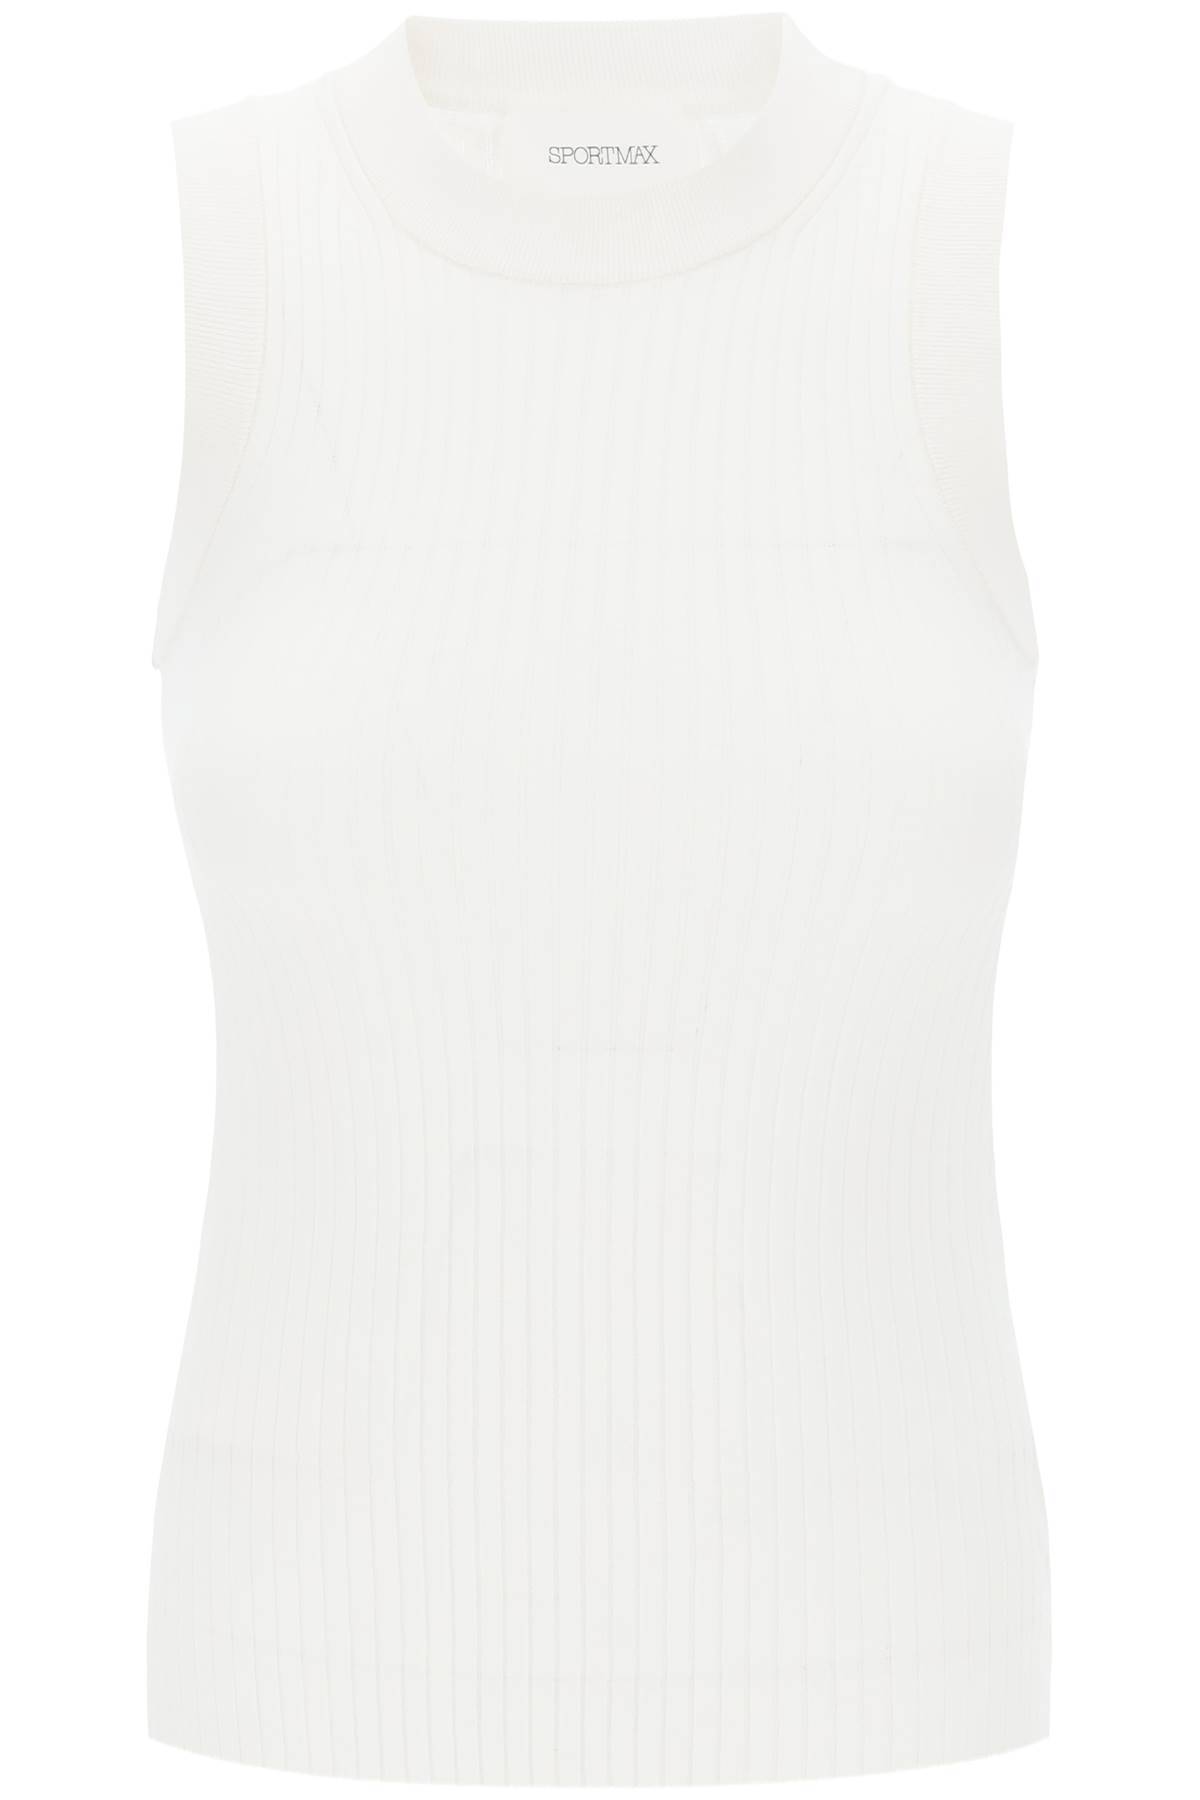 Sportmax Toledo Knitted Tank Top In White